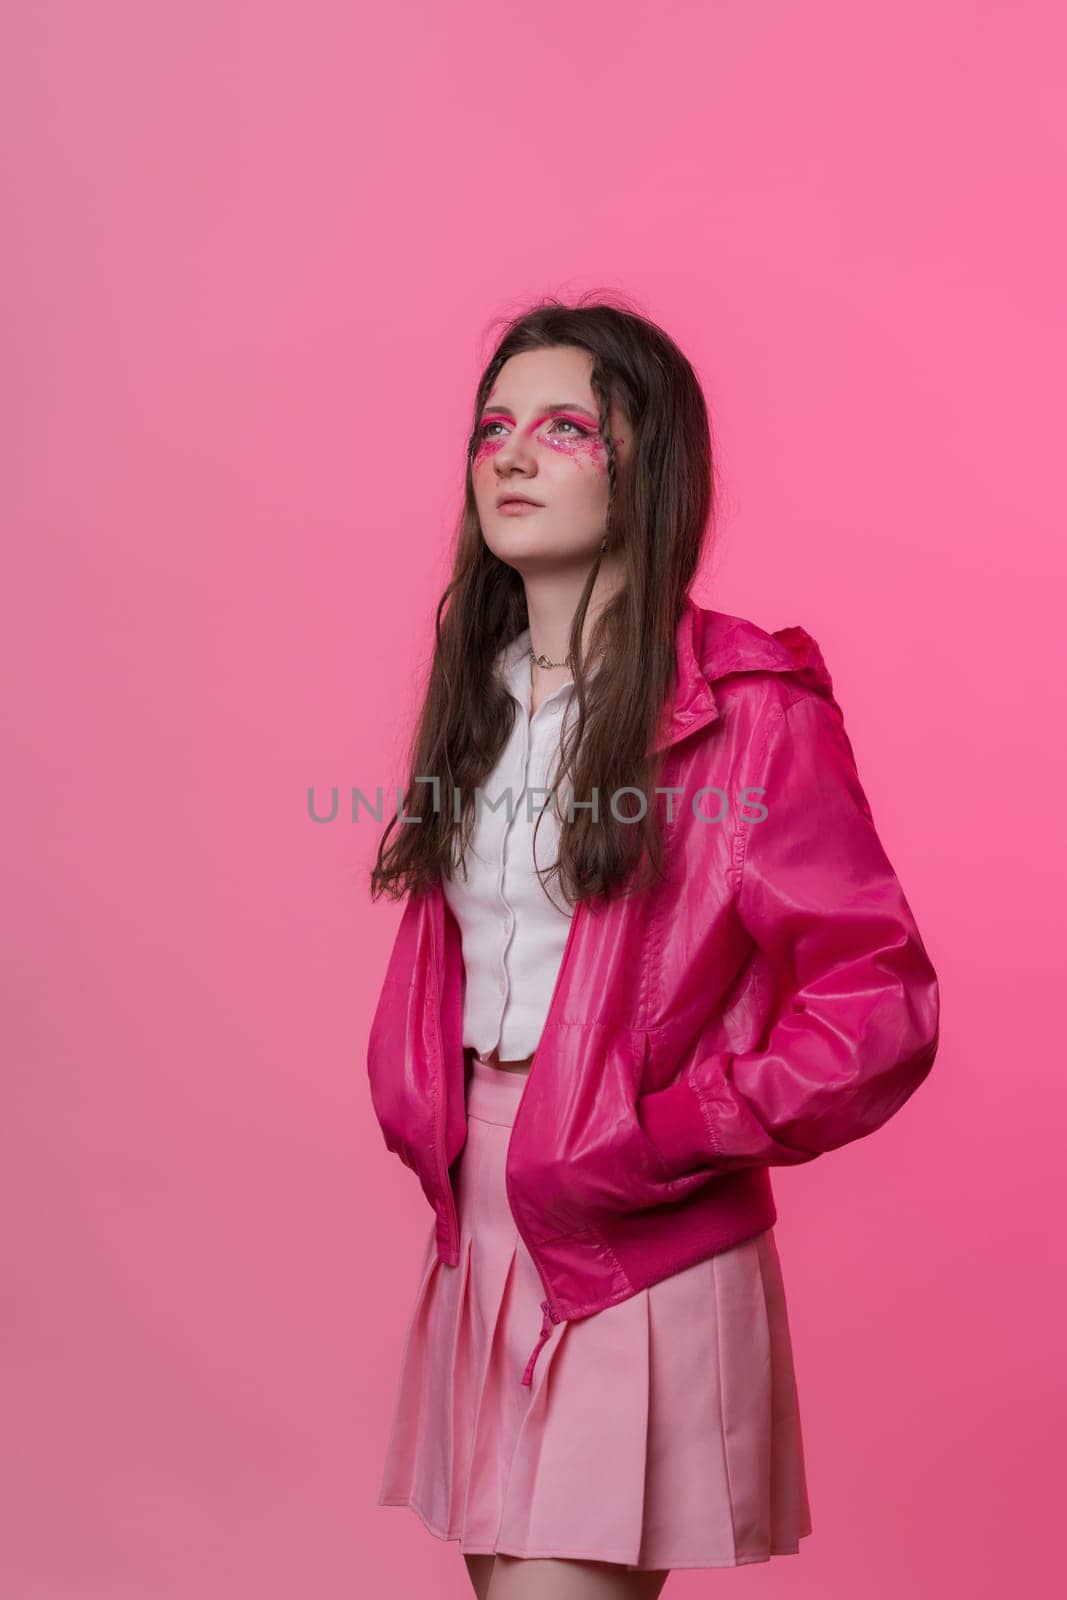 Portrait of woman with pink make-up with sequins and arrows, dressed in pink jacket, skirt and white t-shirt. Young adult Caucasian ethnicity hipster female on pink background. Part of photo series